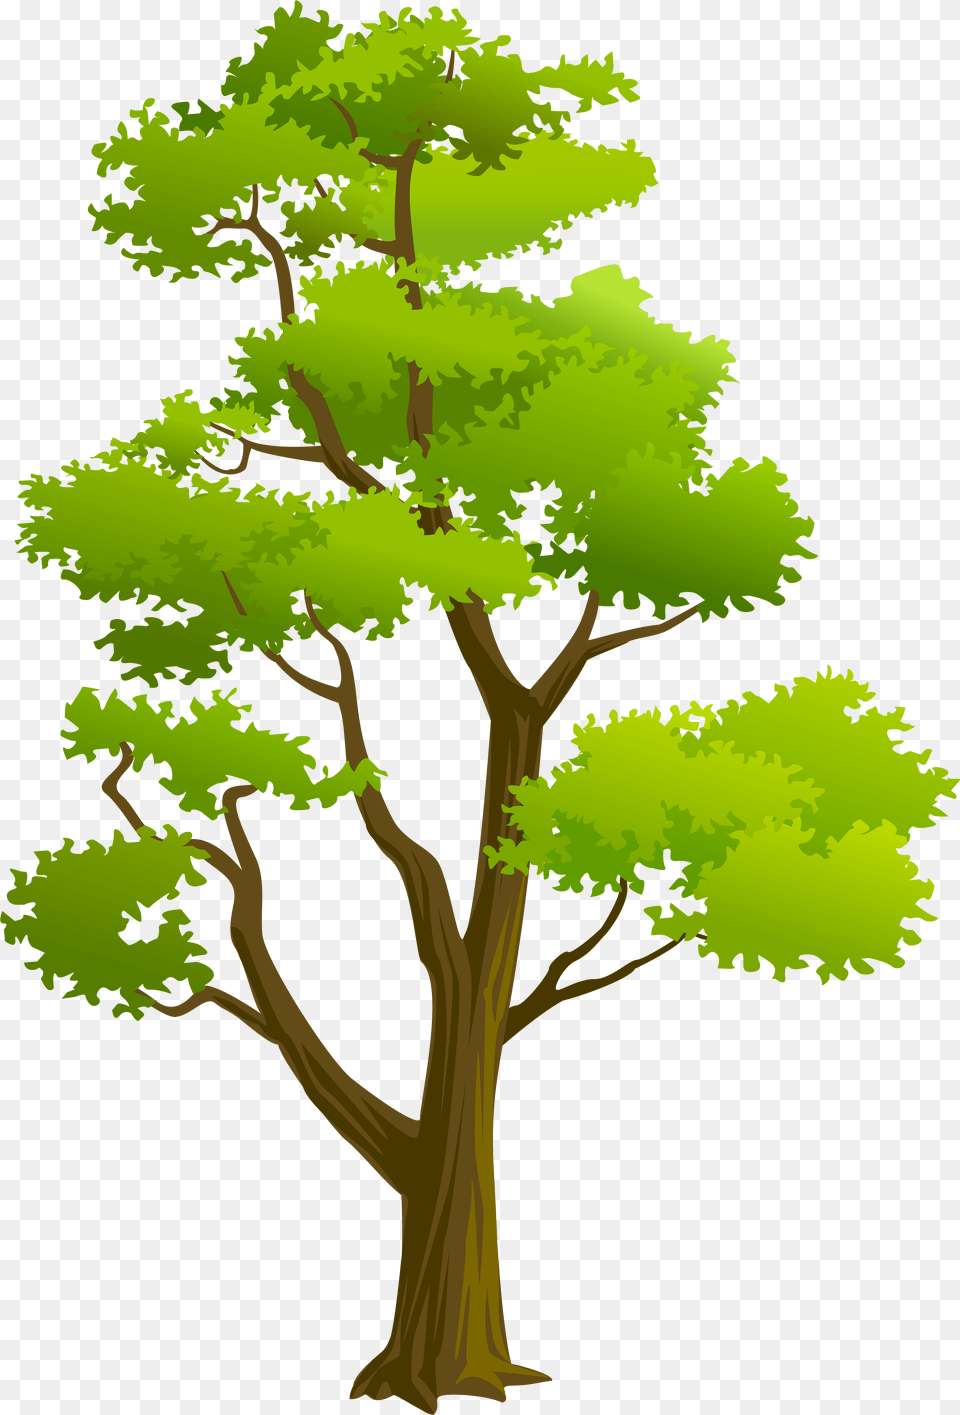 Free Tree Images Background Tree Clipart High Resolution, Green, Plant, Vegetation, Oak Png Image